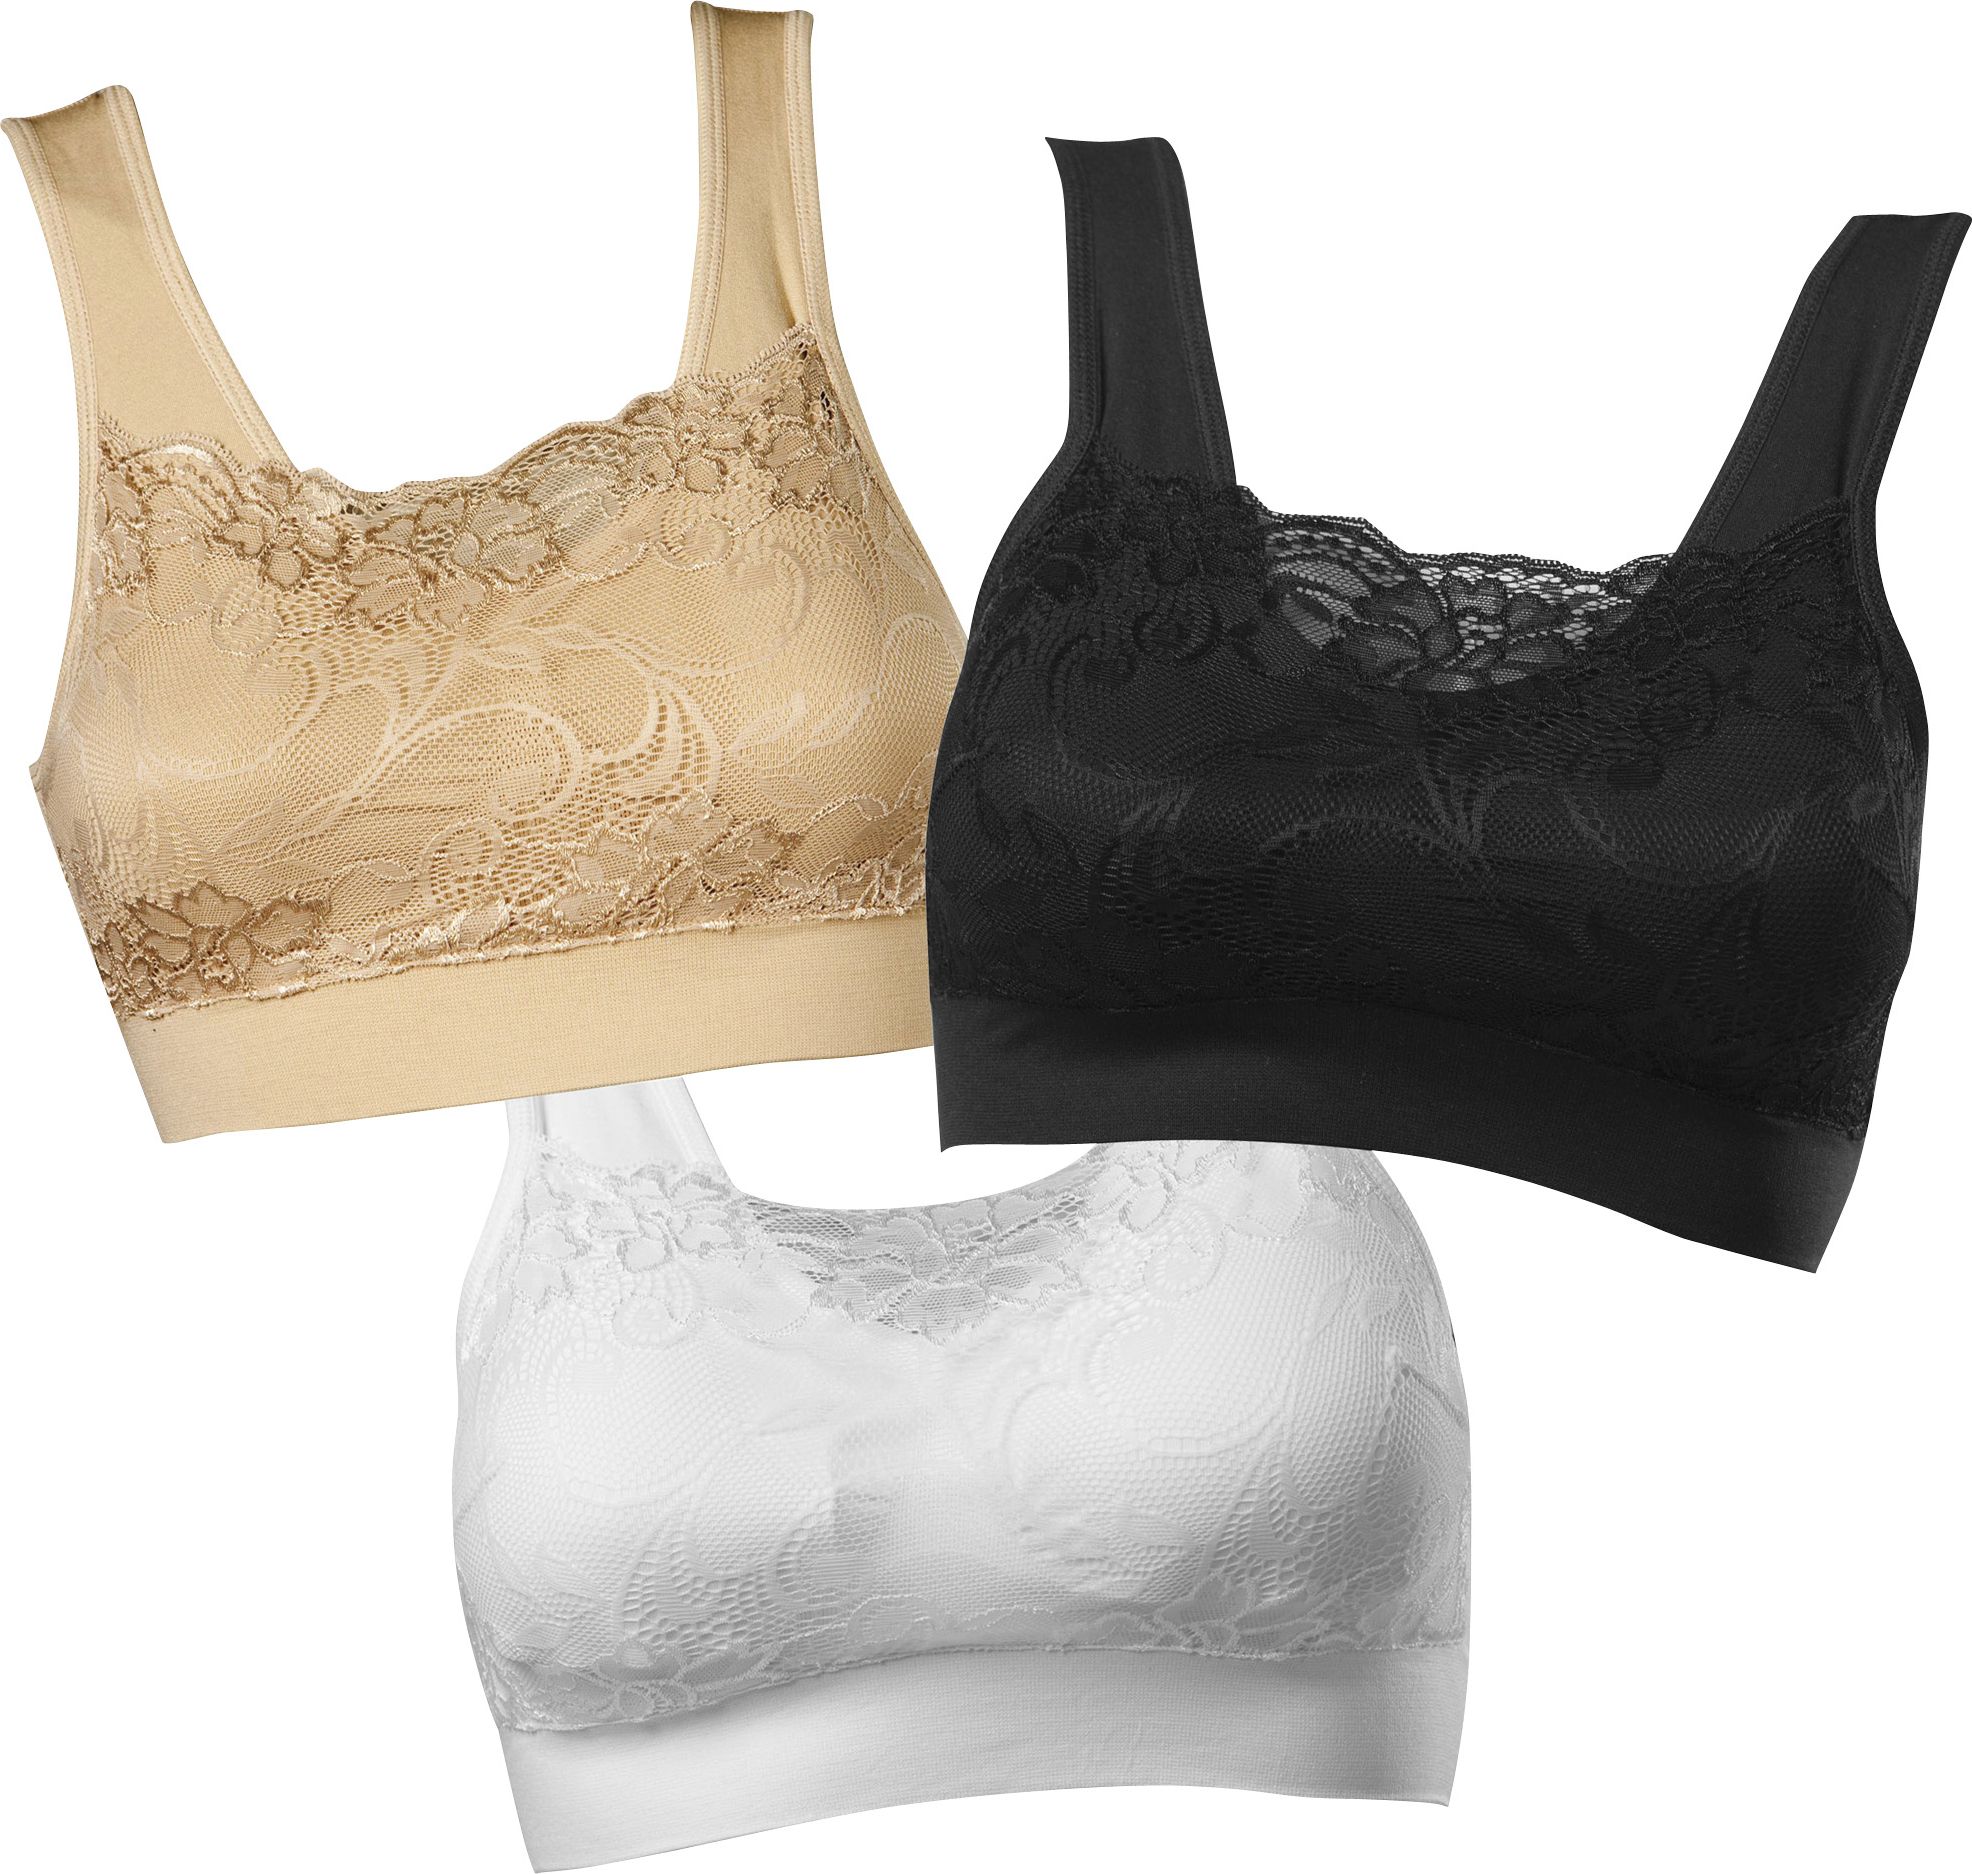 2-Pack of Genie Bras - Black and Nude Colors Malaysia